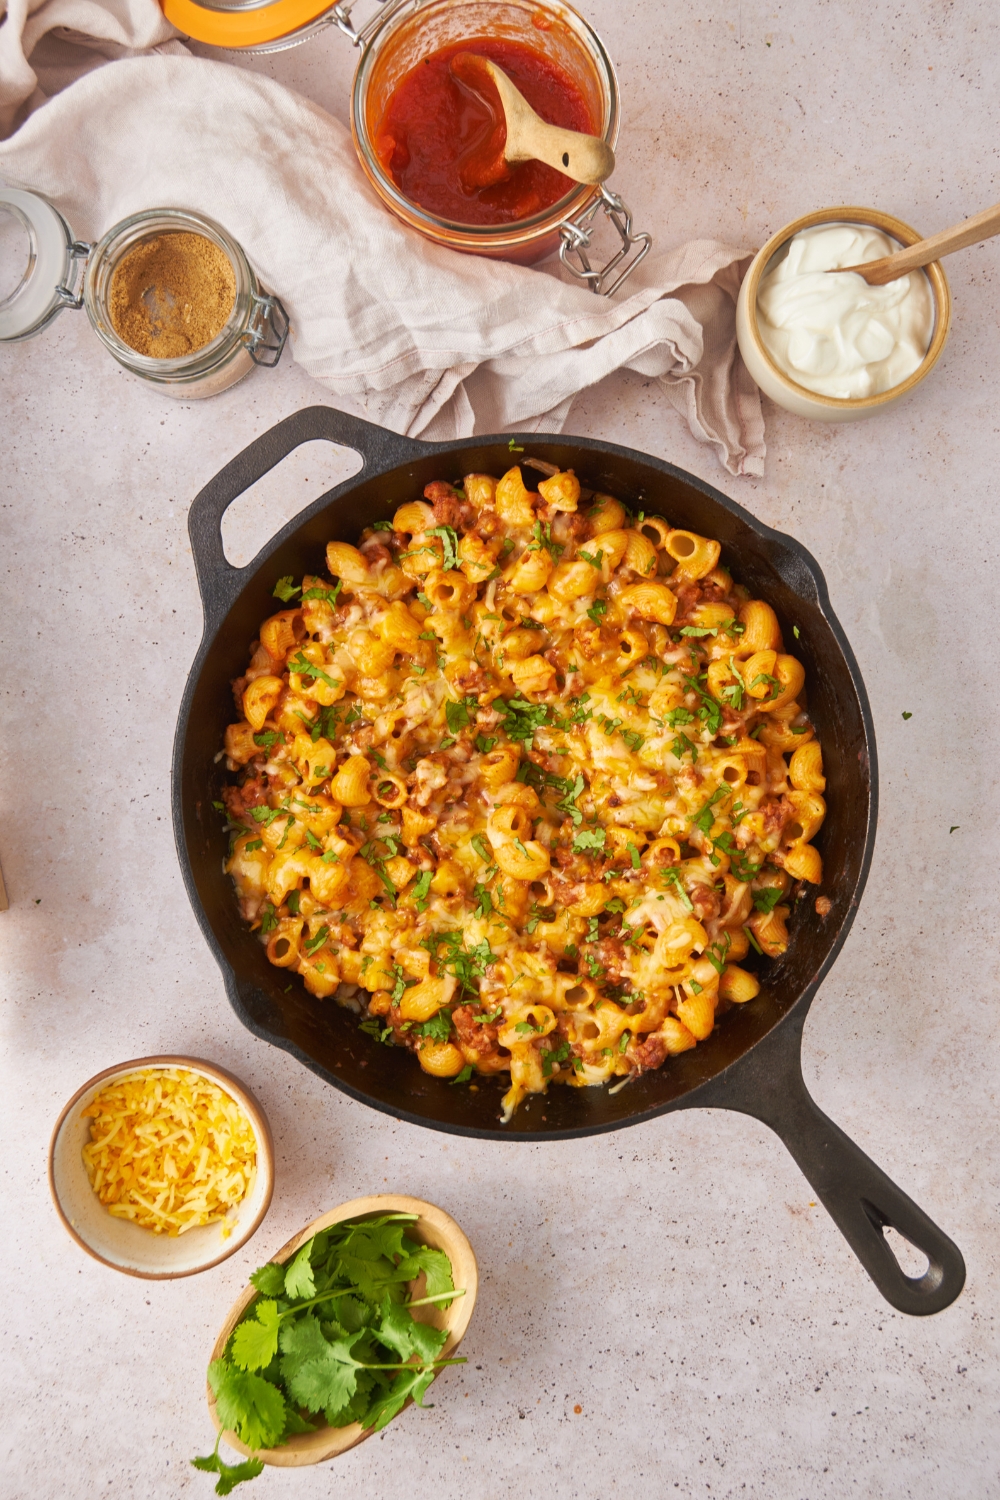 A black cast iron skillet filled with freshly baked taco pasta casserole covered in melted cheese and fresh green herbs.